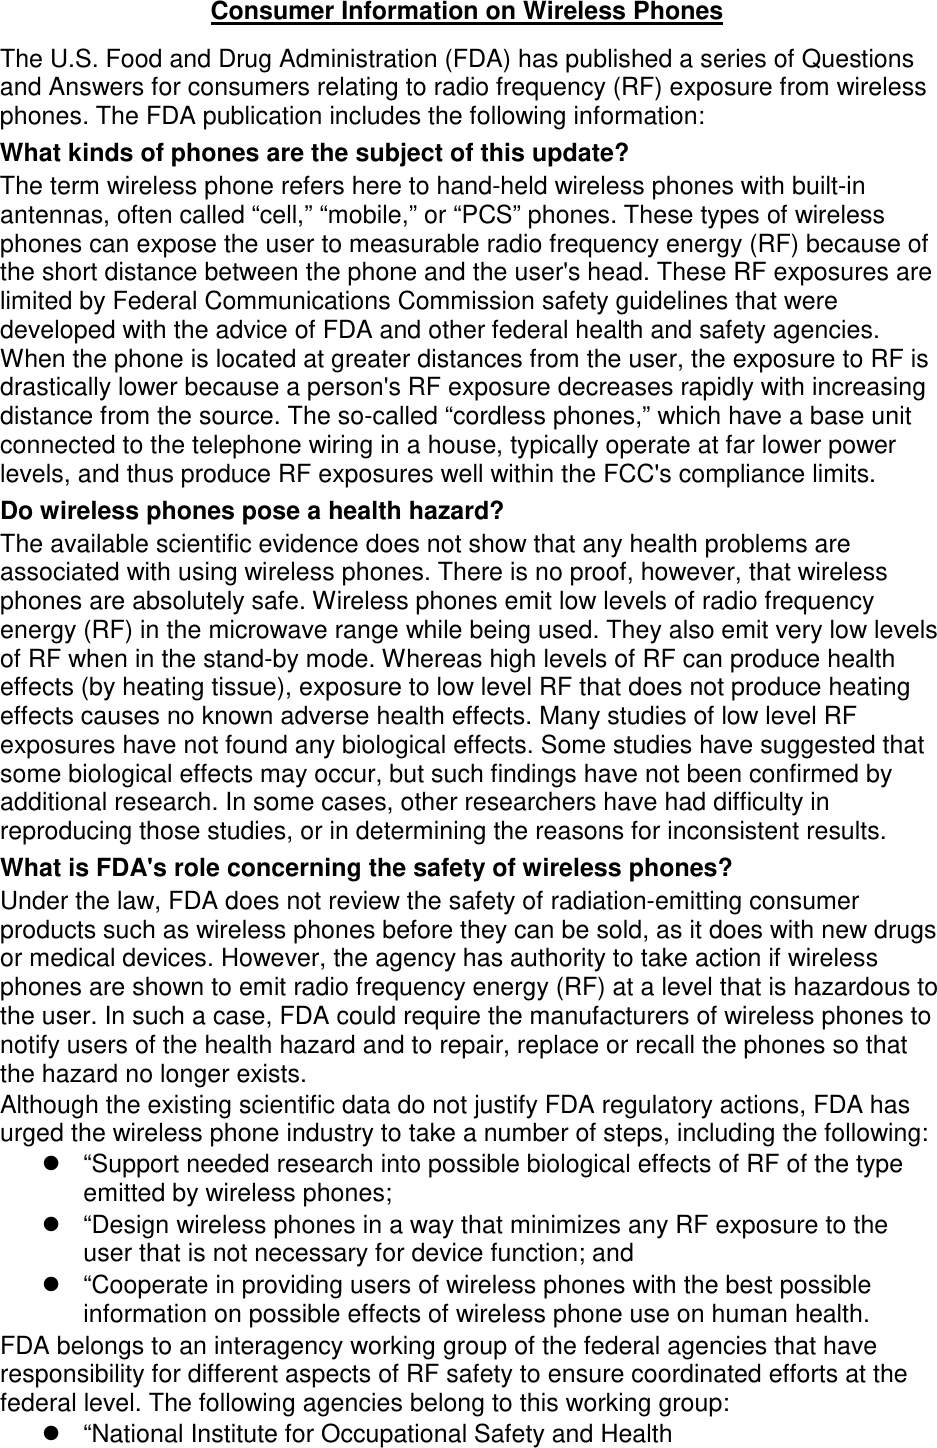 The U.S. Food and Drug Administration (FDA) has published a series of Questions and Answers for consumers relating to radio frequency (RF) exposure from wireless phones. The FDA publication includes the following information: What kinds of phones are the subject of this update? The term wireless phone refers here to hand-held wireless phones with built-in antennas, often called “cell,” “mobile,” or “PCS” phones. These types of wireless phones can expose the user to measurable radio frequency energy (RF) because of the short distance between the phone and the user&apos;s head. These RF exposures are limited by Federal Communications Commission safety guidelines that were developed with the advice of FDA and other federal health and safety agencies. When the phone is located at greater distances from the user, the exposure to RF is drastically lower because a person&apos;s RF exposure decreases rapidly with increasing distance from the source. The so-called “cordless phones,” which have a base unit connected to the telephone wiring in a house, typically operate at far lower power levels, and thus produce RF exposures well within the FCC&apos;s compliance limits. Do wireless phones pose a health hazard? The available scientific evidence does not show that any health problems are associated with using wireless phones. There is no proof, however, that wireless phones are absolutely safe. Wireless phones emit low levels of radio frequency energy (RF) in the microwave range while being used. They also emit very low levels of RF when in the stand-by mode. Whereas high levels of RF can produce health effects (by heating tissue), exposure to low level RF that does not produce heating effects causes no known adverse health effects. Many studies of low level RF exposures have not found any biological effects. Some studies have suggested that some biological effects may occur, but such findings have not been confirmed by additional research. In some cases, other researchers have had difficulty in reproducing those studies, or in determining the reasons for inconsistent results. What is FDA&apos;s role concerning the safety of wireless phones? Under the law, FDA does not review the safety of radiation-emitting consumer products such as wireless phones before they can be sold, as it does with new drugs or medical devices. However, the agency has authority to take action if wireless phones are shown to emit radio frequency energy (RF) at a level that is hazardous to the user. In such a case, FDA could require the manufacturers of wireless phones to notify users of the health hazard and to repair, replace or recall the phones so that the hazard no longer exists. Although the existing scientific data do not justify FDA regulatory actions, FDA has urged the wireless phone industry to take a number of steps, including the following: “Support needed research into possible biological effects of RF of the typeemitted by wireless phones;“Design wireless phones in a way that minimizes any RF exposure to theuser that is not necessary for device function; and“Cooperate in providing users of wireless phones with the best possibleinformation on possible effects of wireless phone use on human health.FDA belongs to an interagency working group of the federal agencies that have responsibility for different aspects of RF safety to ensure coordinated efforts at the federal level. The following agencies belong to this working group: “National Institute for Occupational Safety and HealthConsumer Information on Wireless Phones 